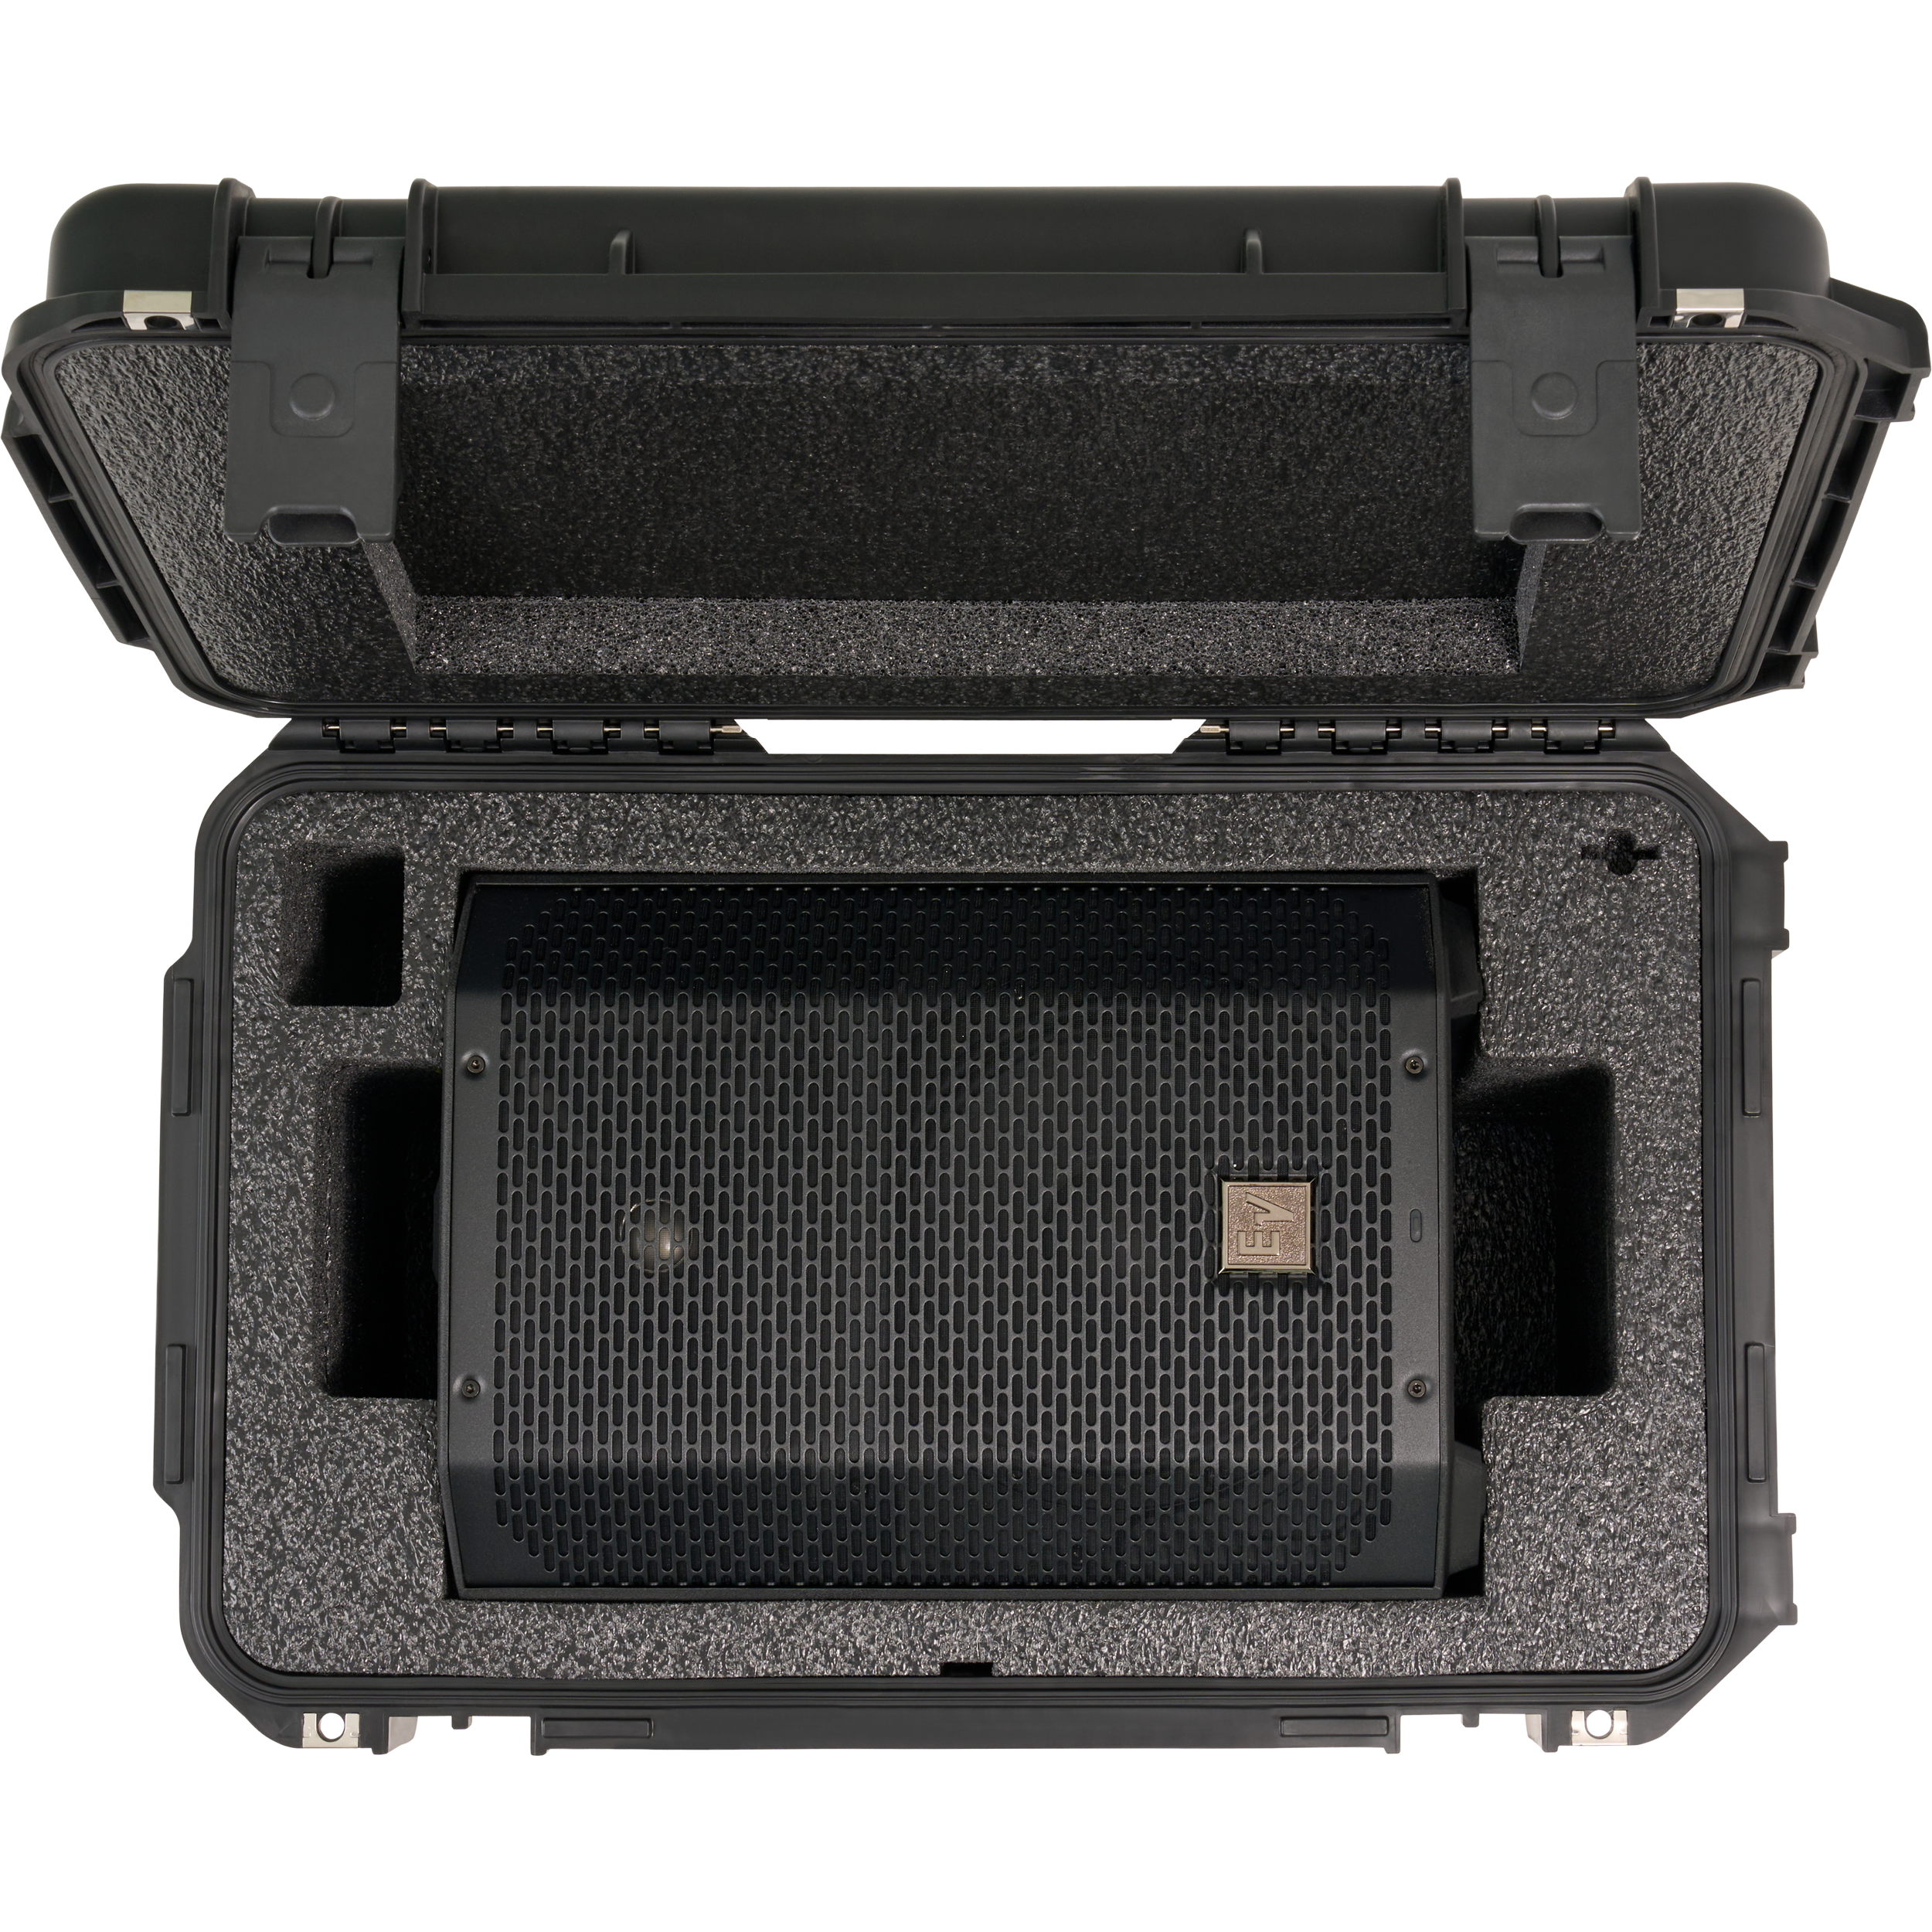 BYFP ipCase for Electro-Voice EVERSE 8